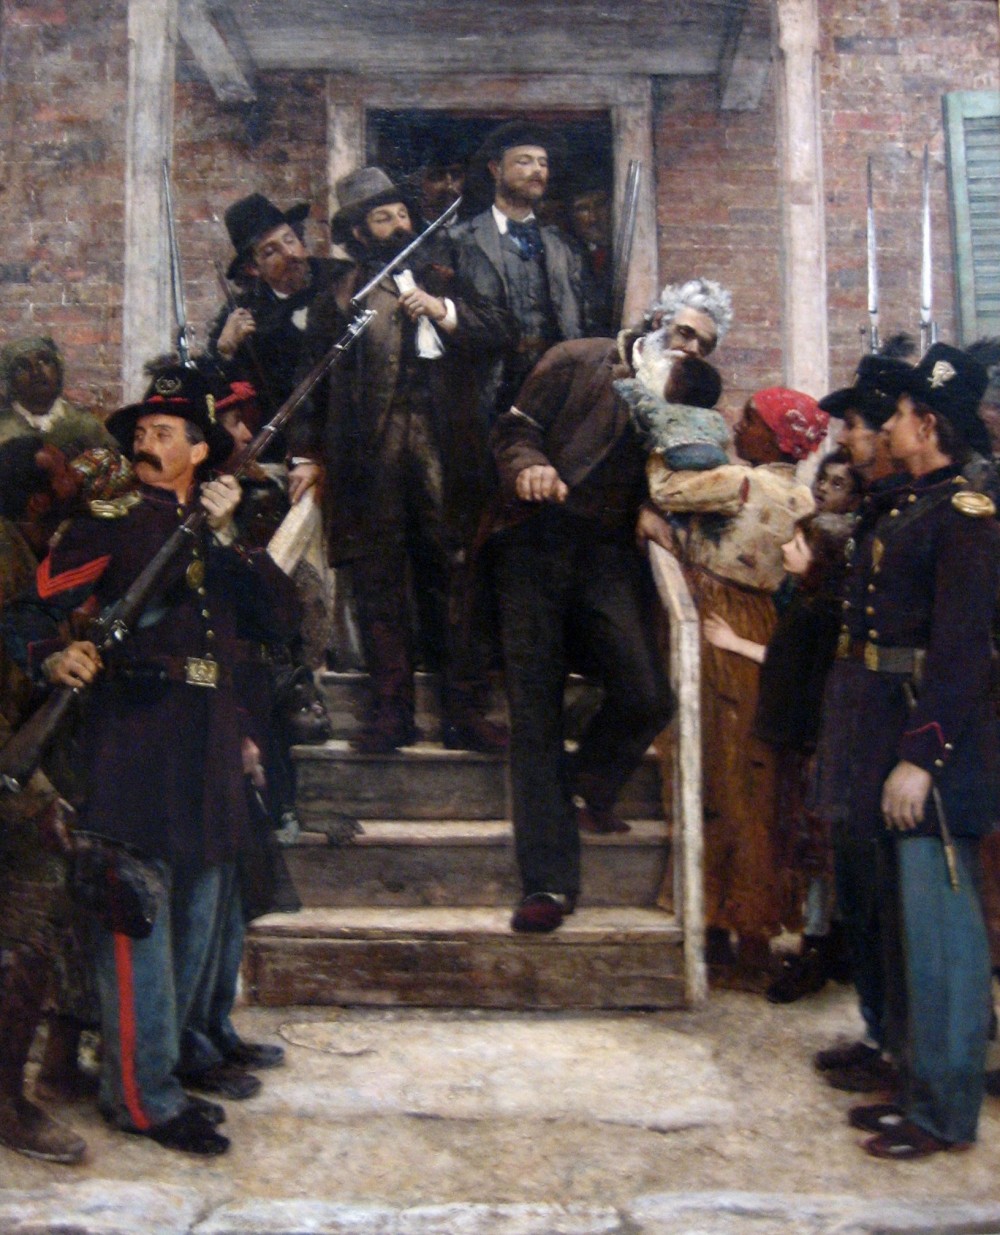 Over two decades after John Brown’s death, Thomas Hovenden portrayed Brown as a saint in this painting. As he is lead to his execution for attempting to destroy slavery, Brown poignantly leans over a rail to kiss a black baby. 